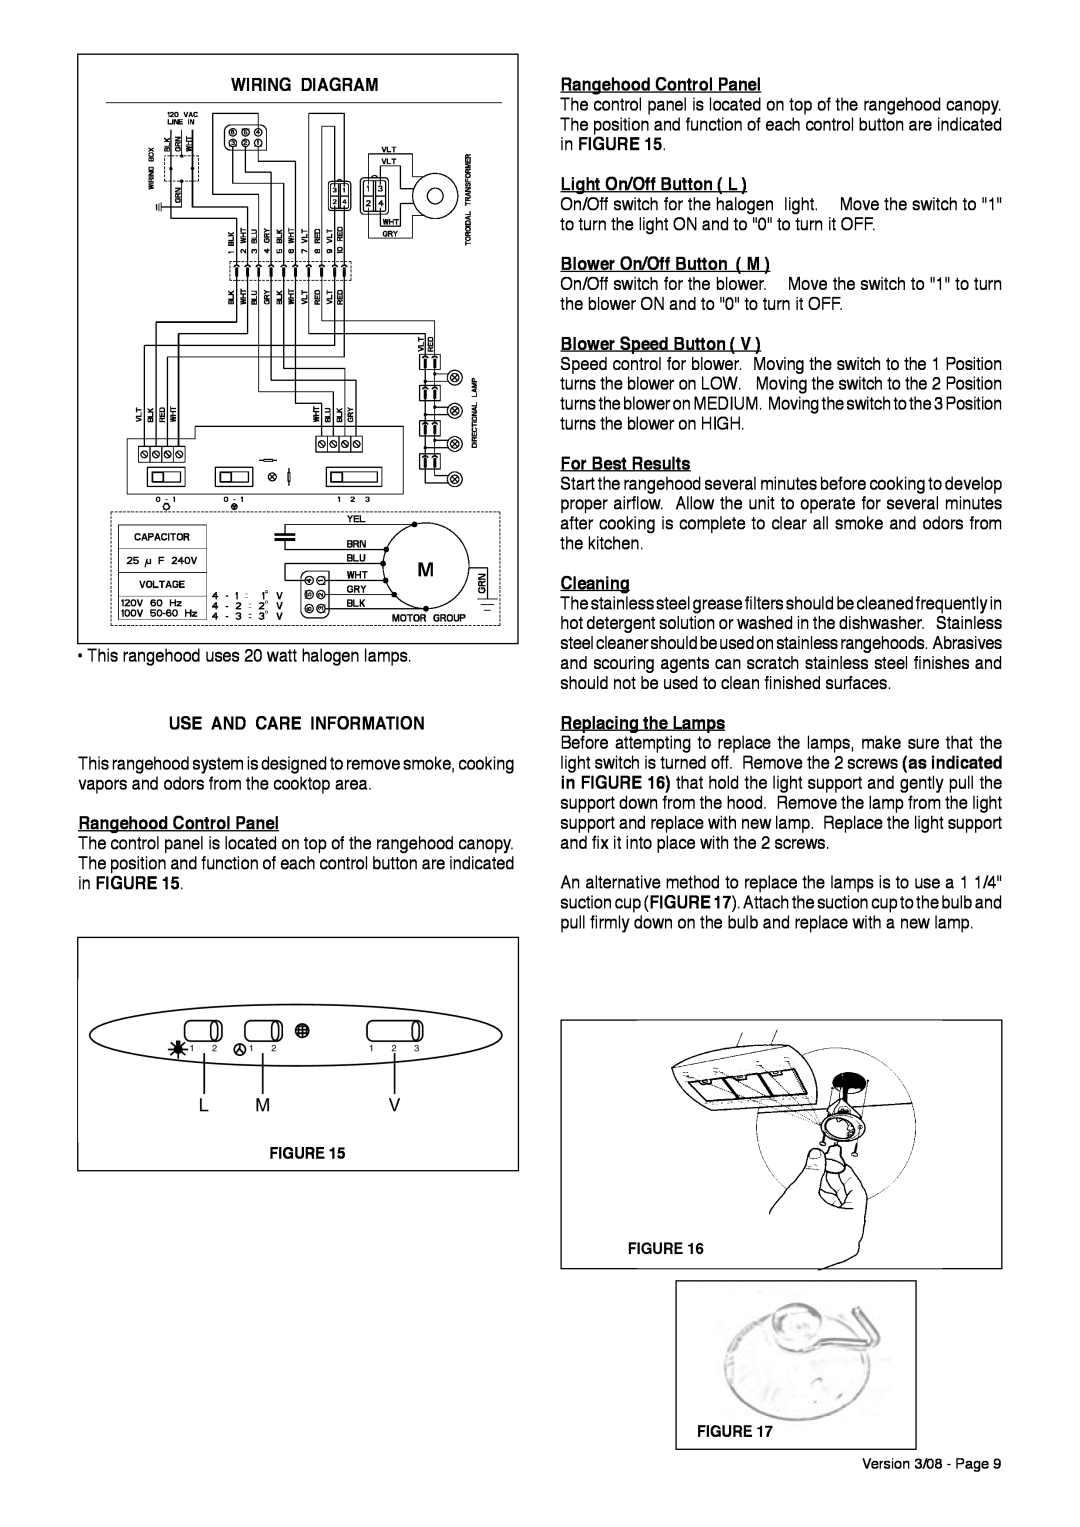 Faber Island Mount Canopy Rangehood Wiring Diagram, Use And Care Information, Rangehood Control Panel, Blower Speed Button 